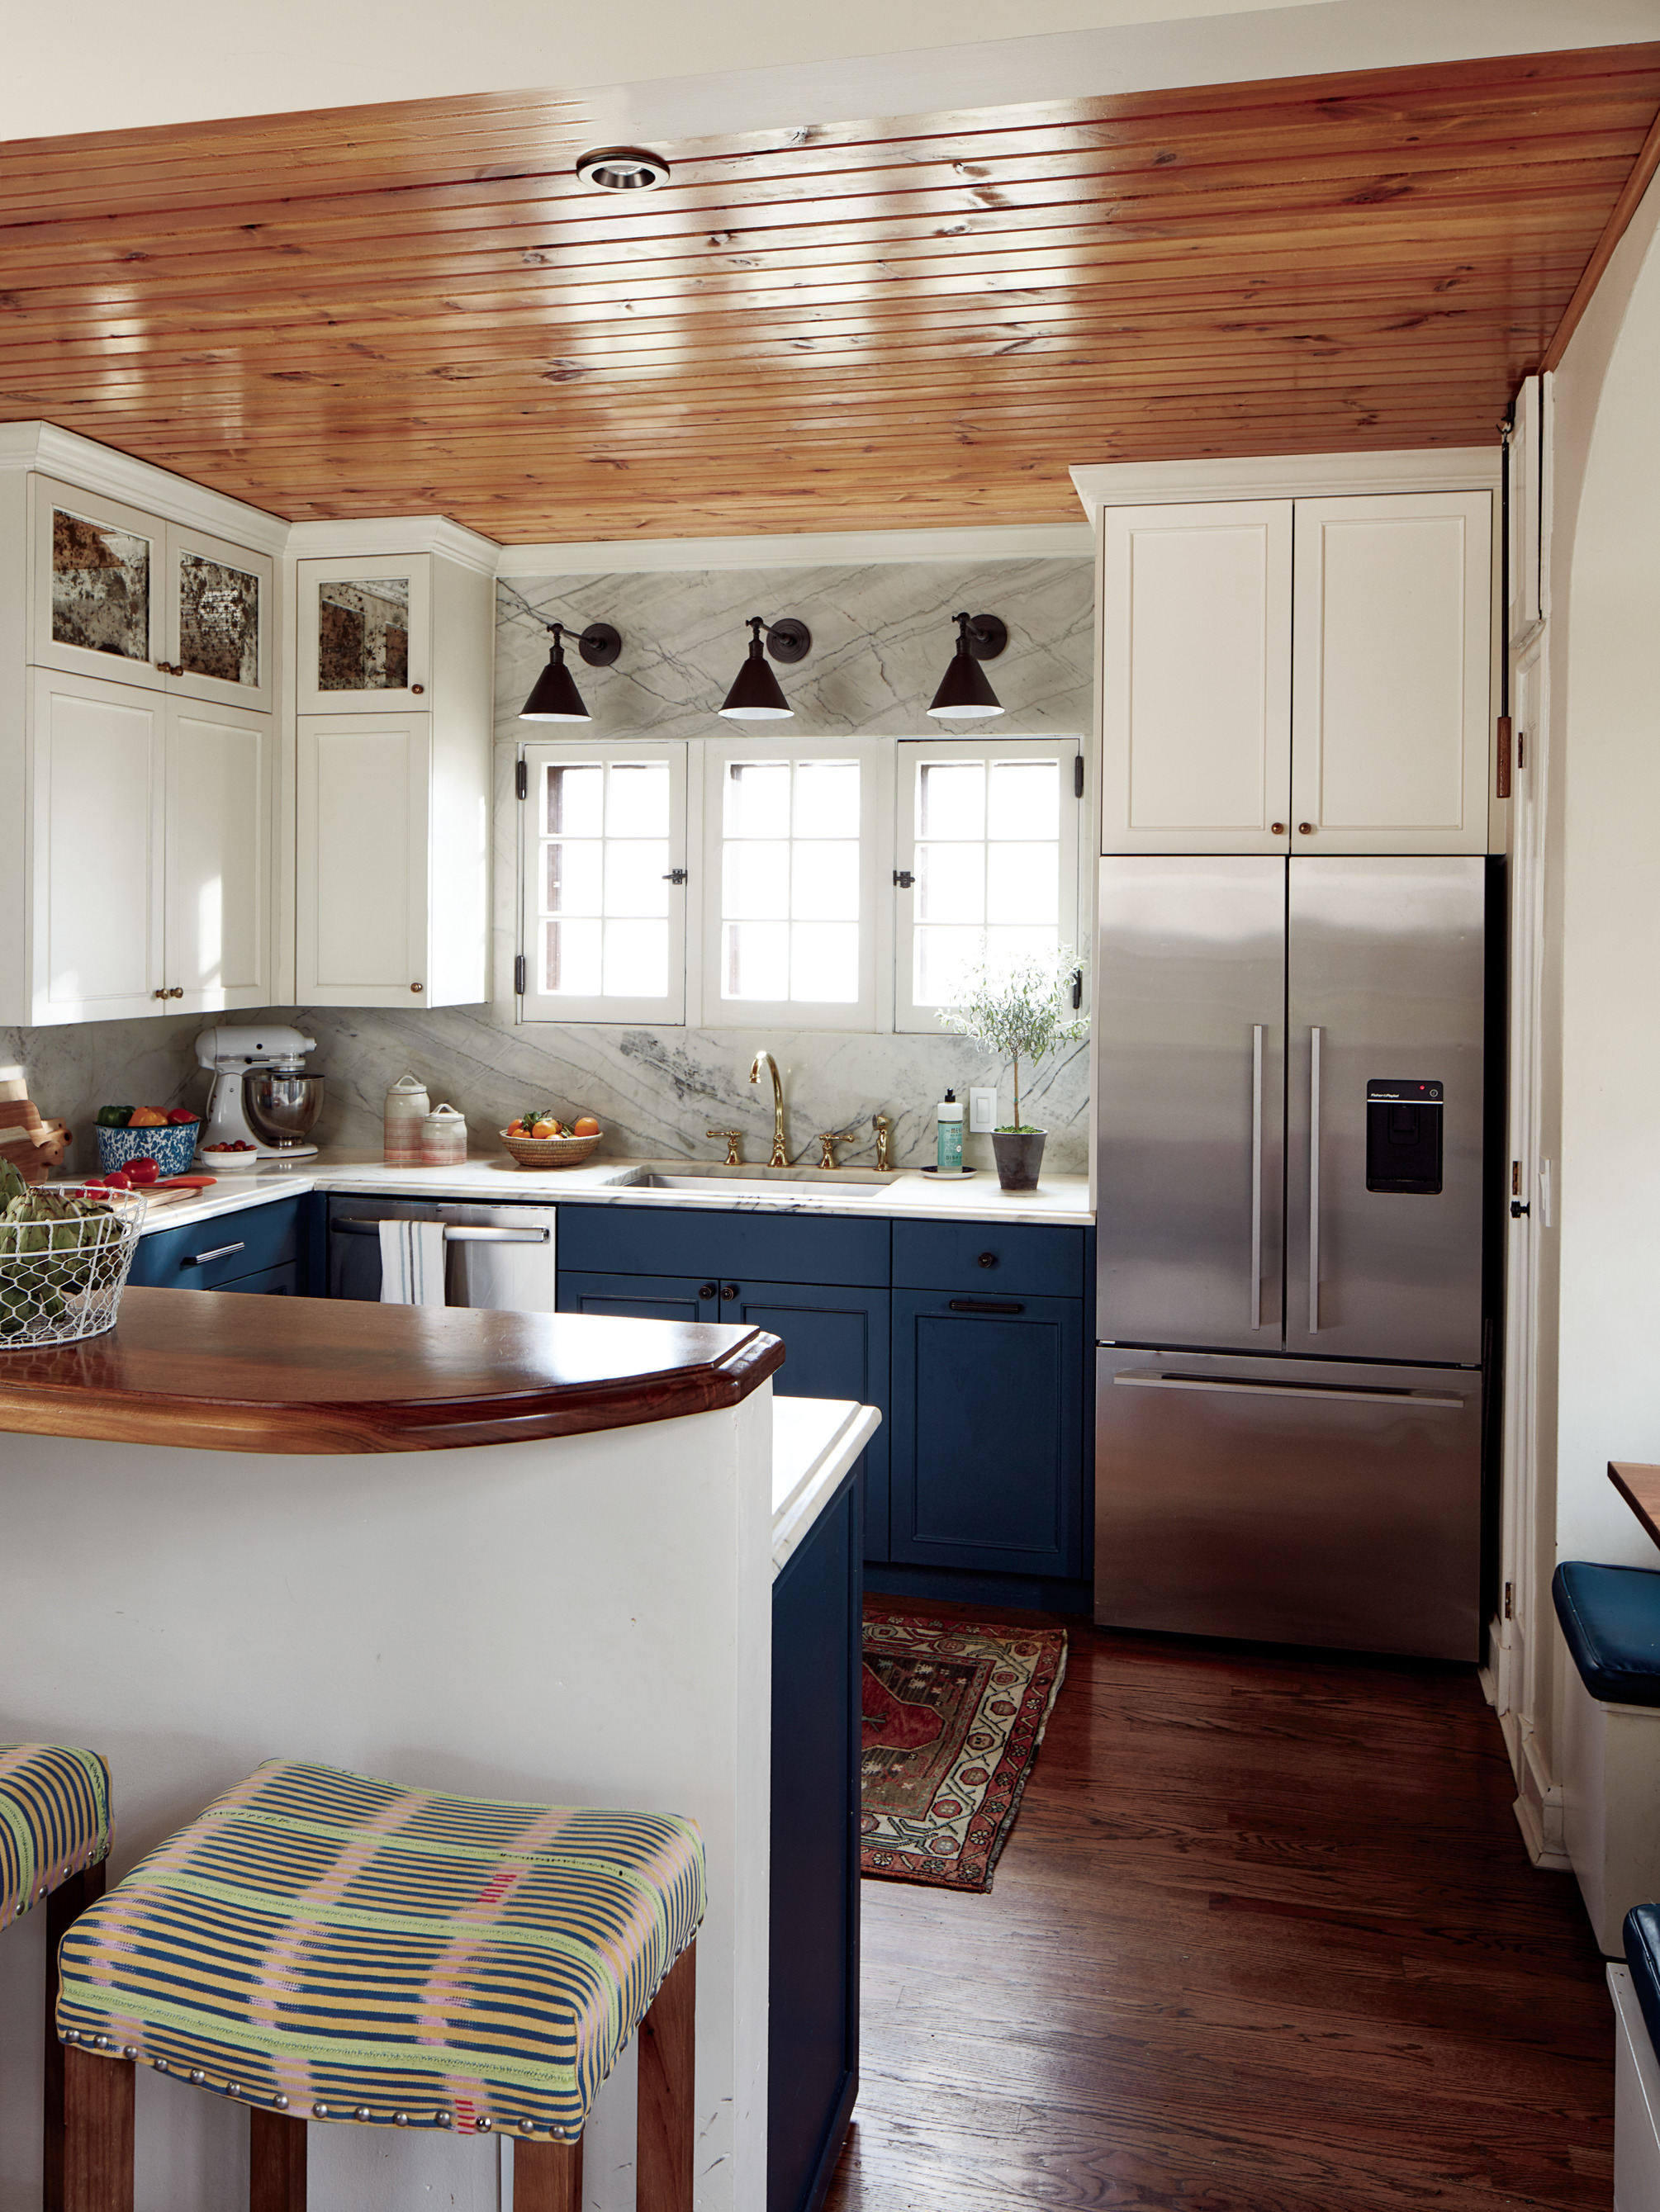 A kitchen renovation that aims to improve a family’s cook space.